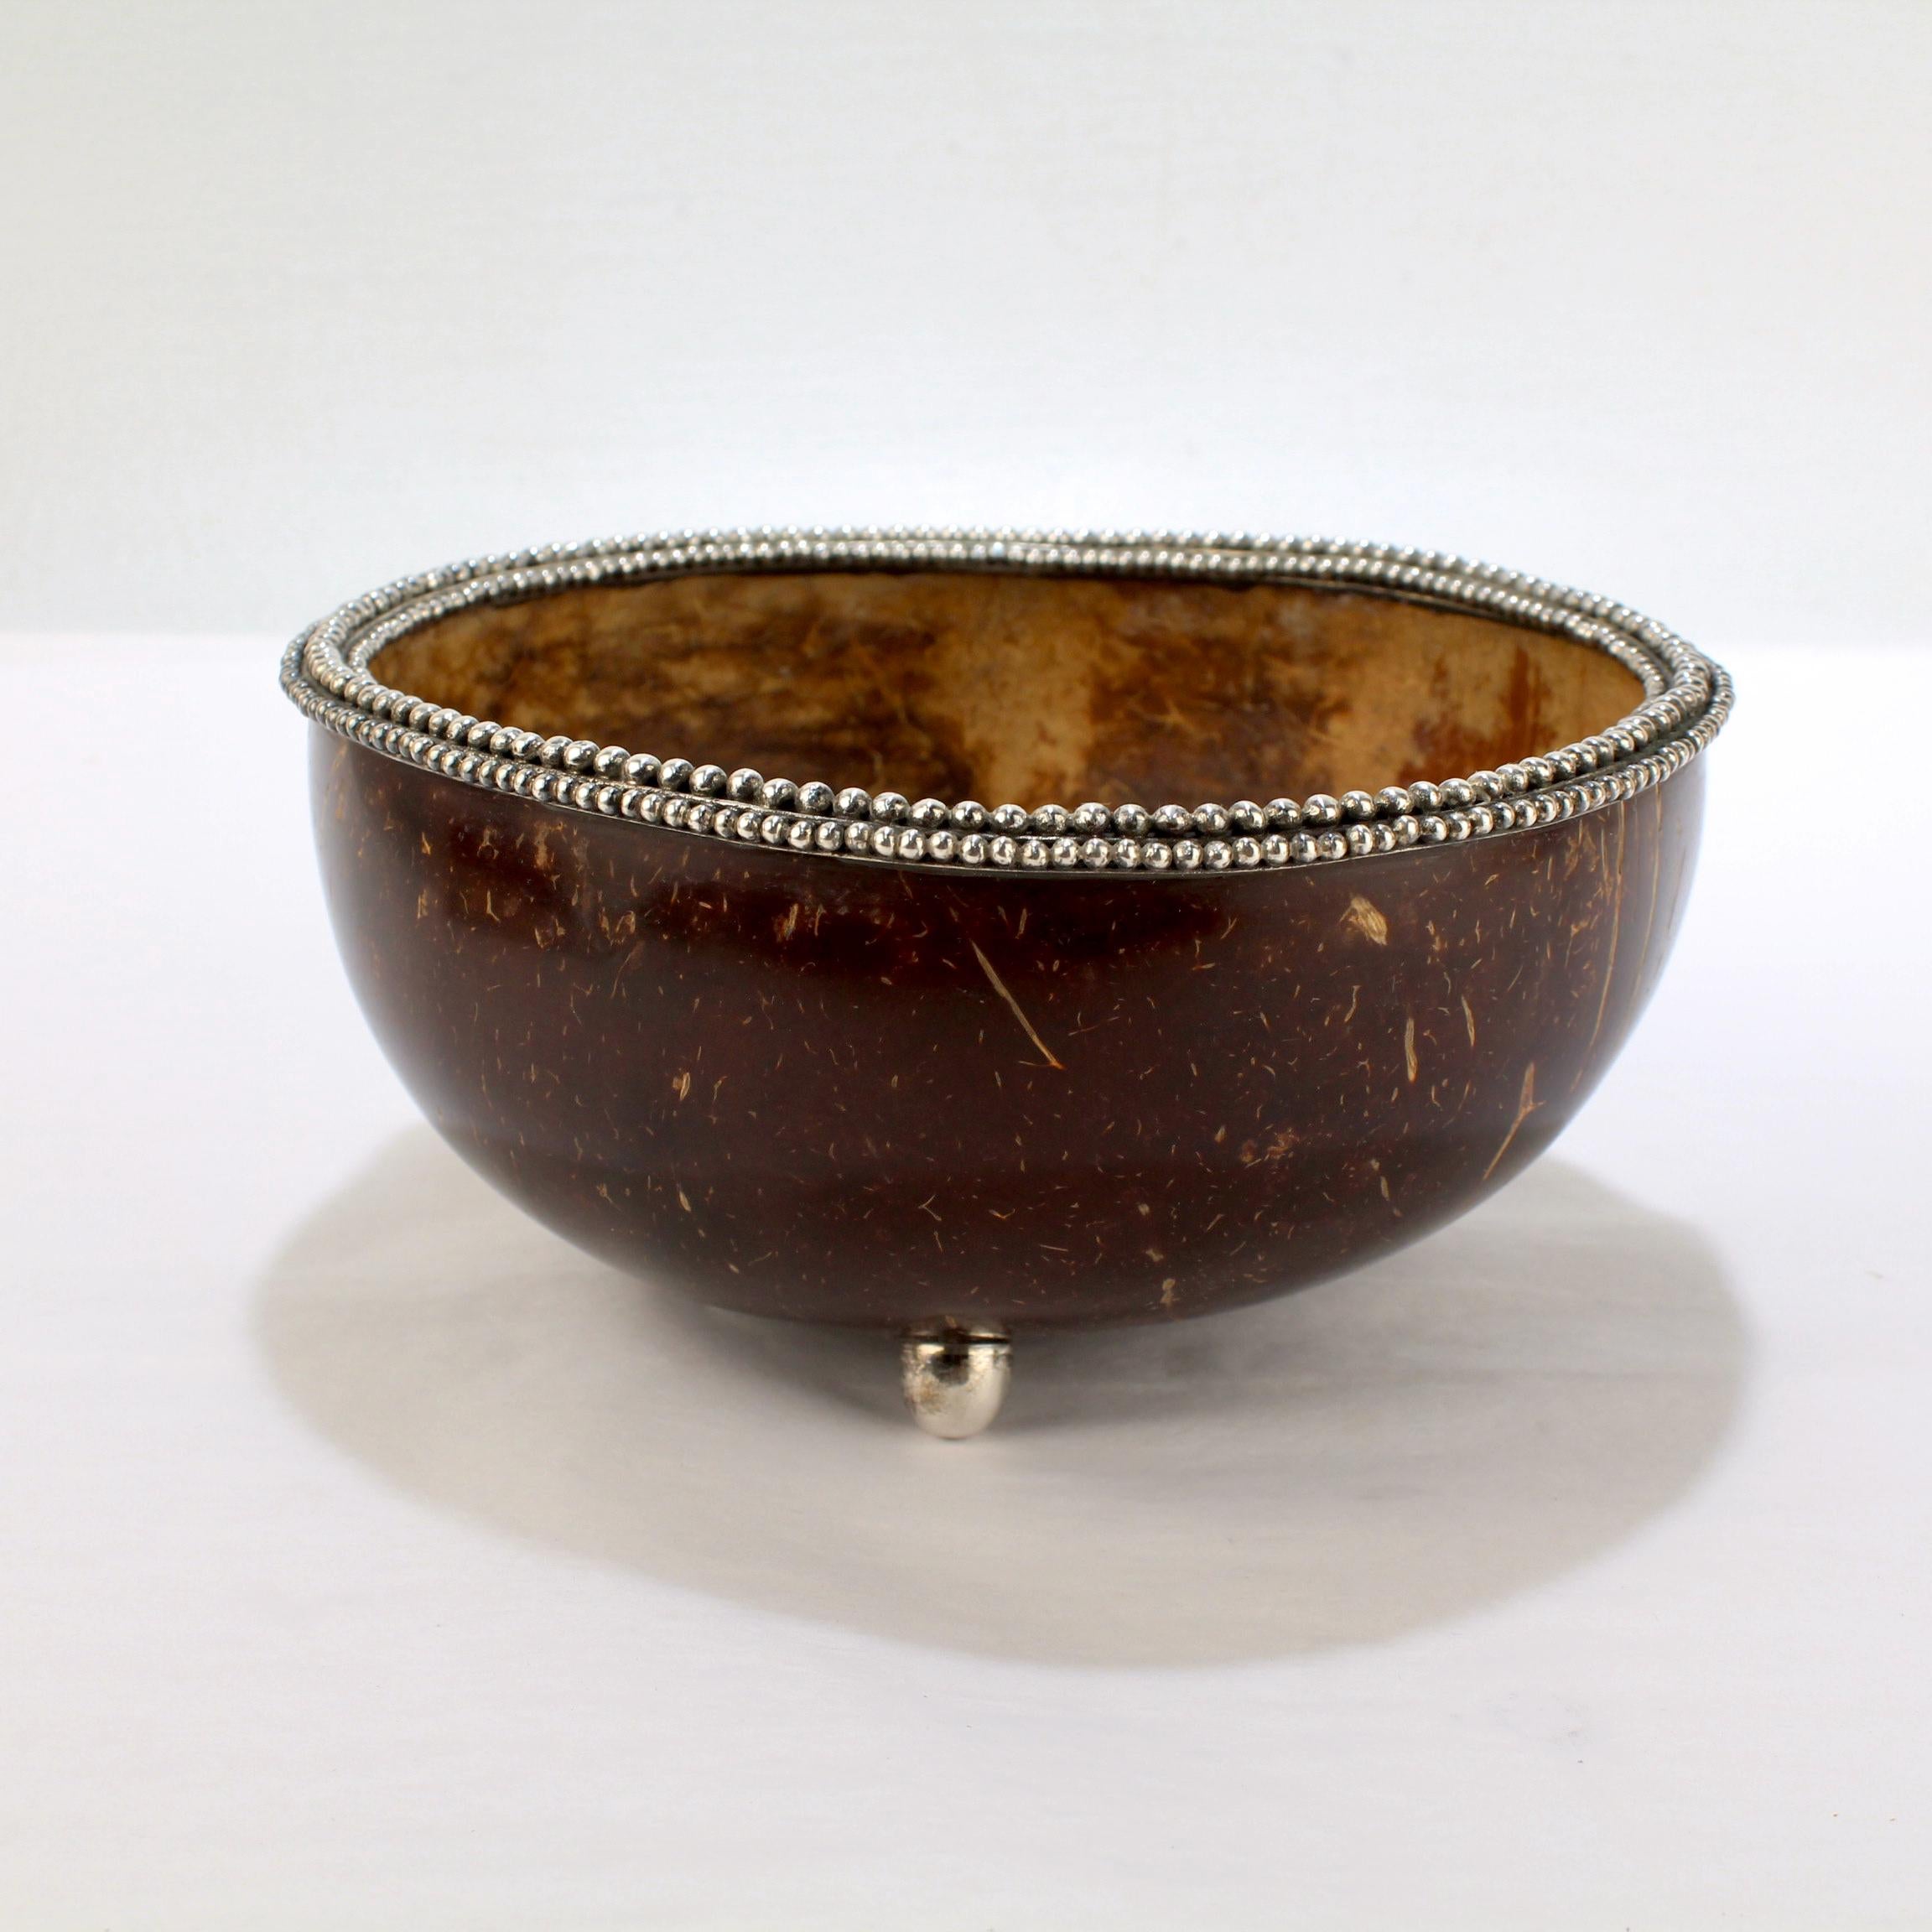 A wonderful bowl by John Hardy.

Constructed from half of a coconut shell.

Mounted with 3 sterling silver bullet shaped feet and a beaded sterling rim. 

(The bowl was likely produced in Bali).

Simply a great bowl!

Date:
20th